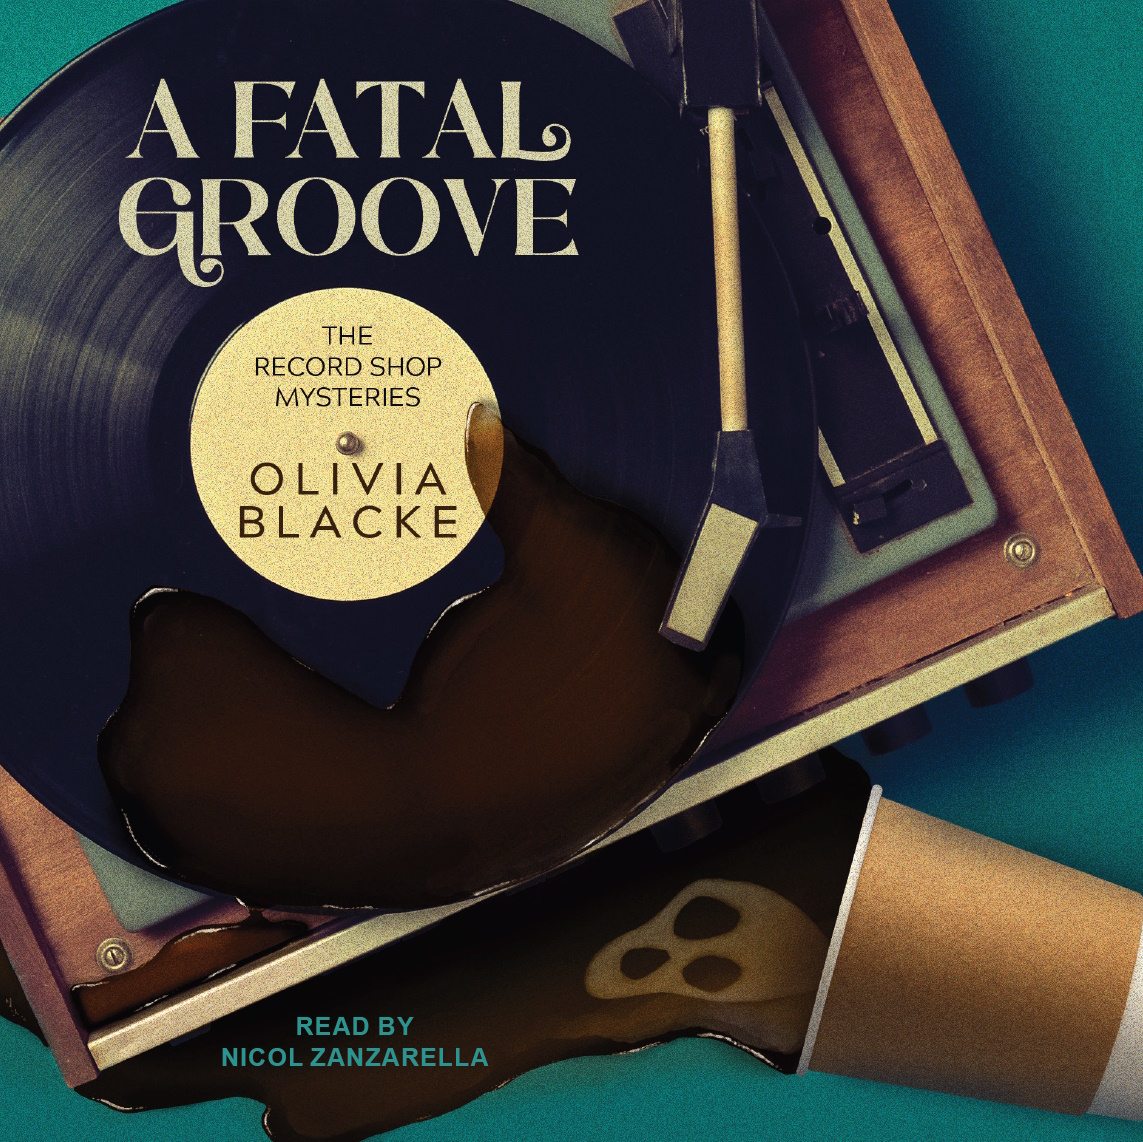 A FATAL GROOVE by Olivia Blacke audiobook edition